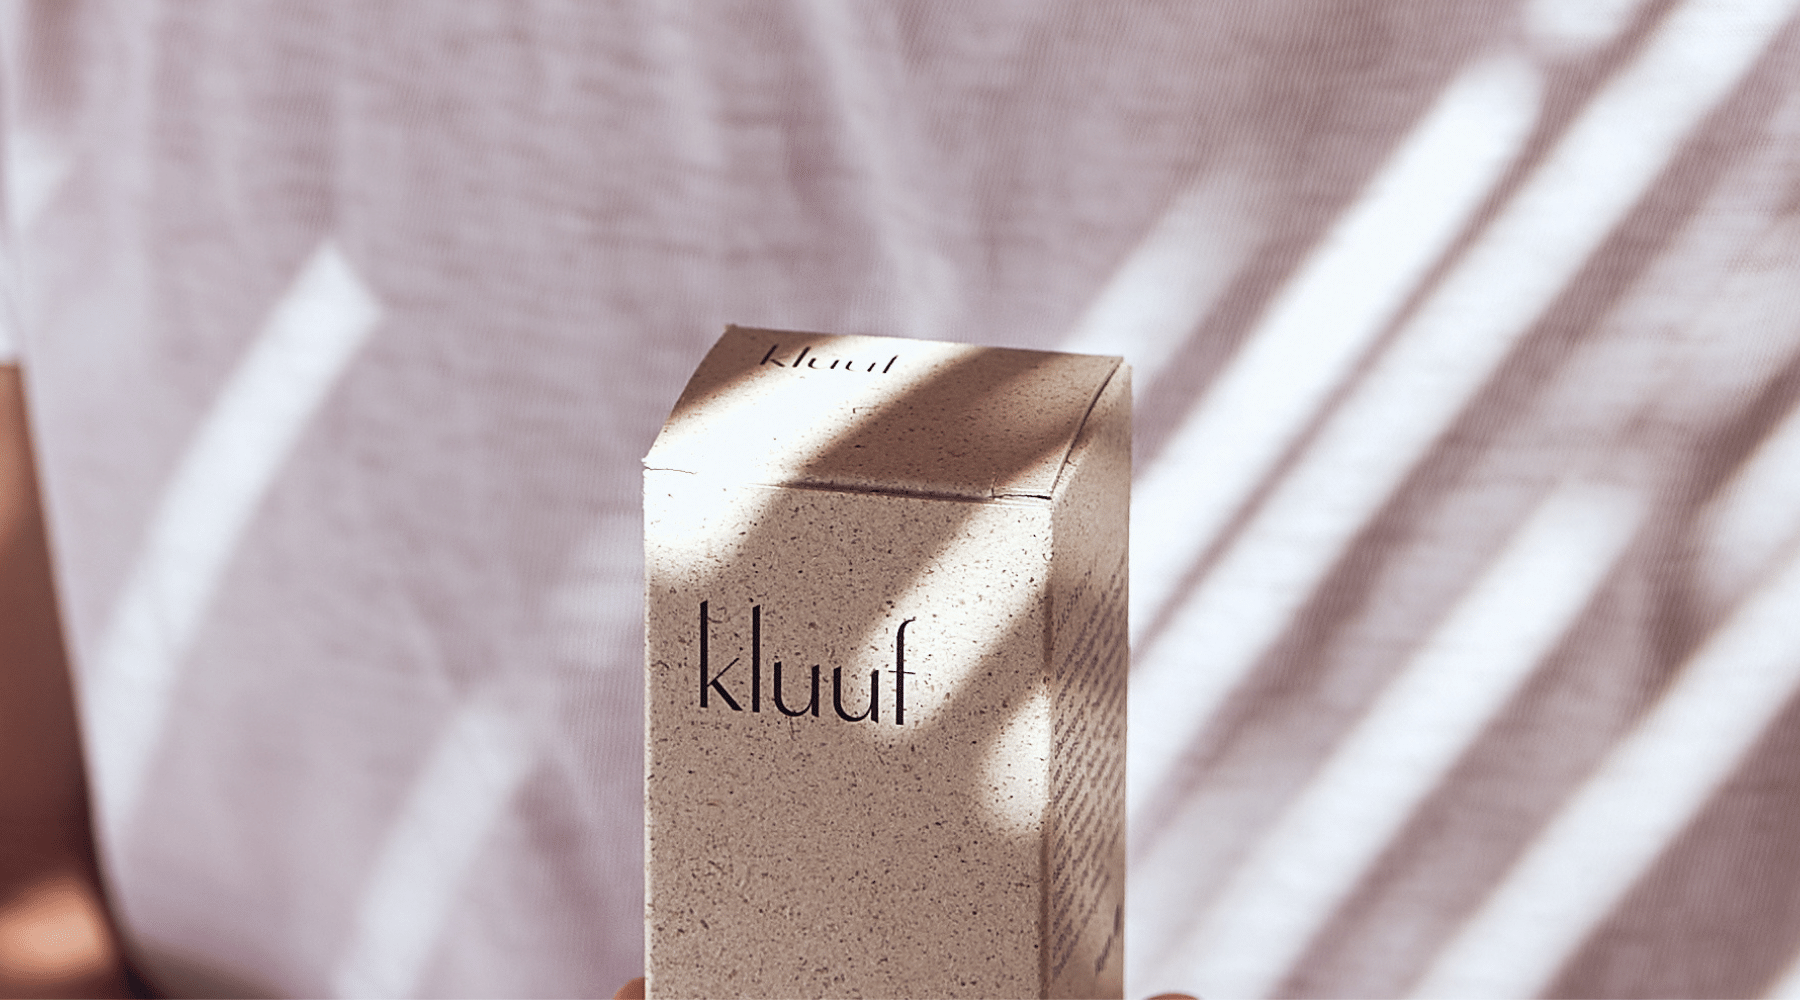 Close-up Kluuf face cream packaging in front of white t-shirt